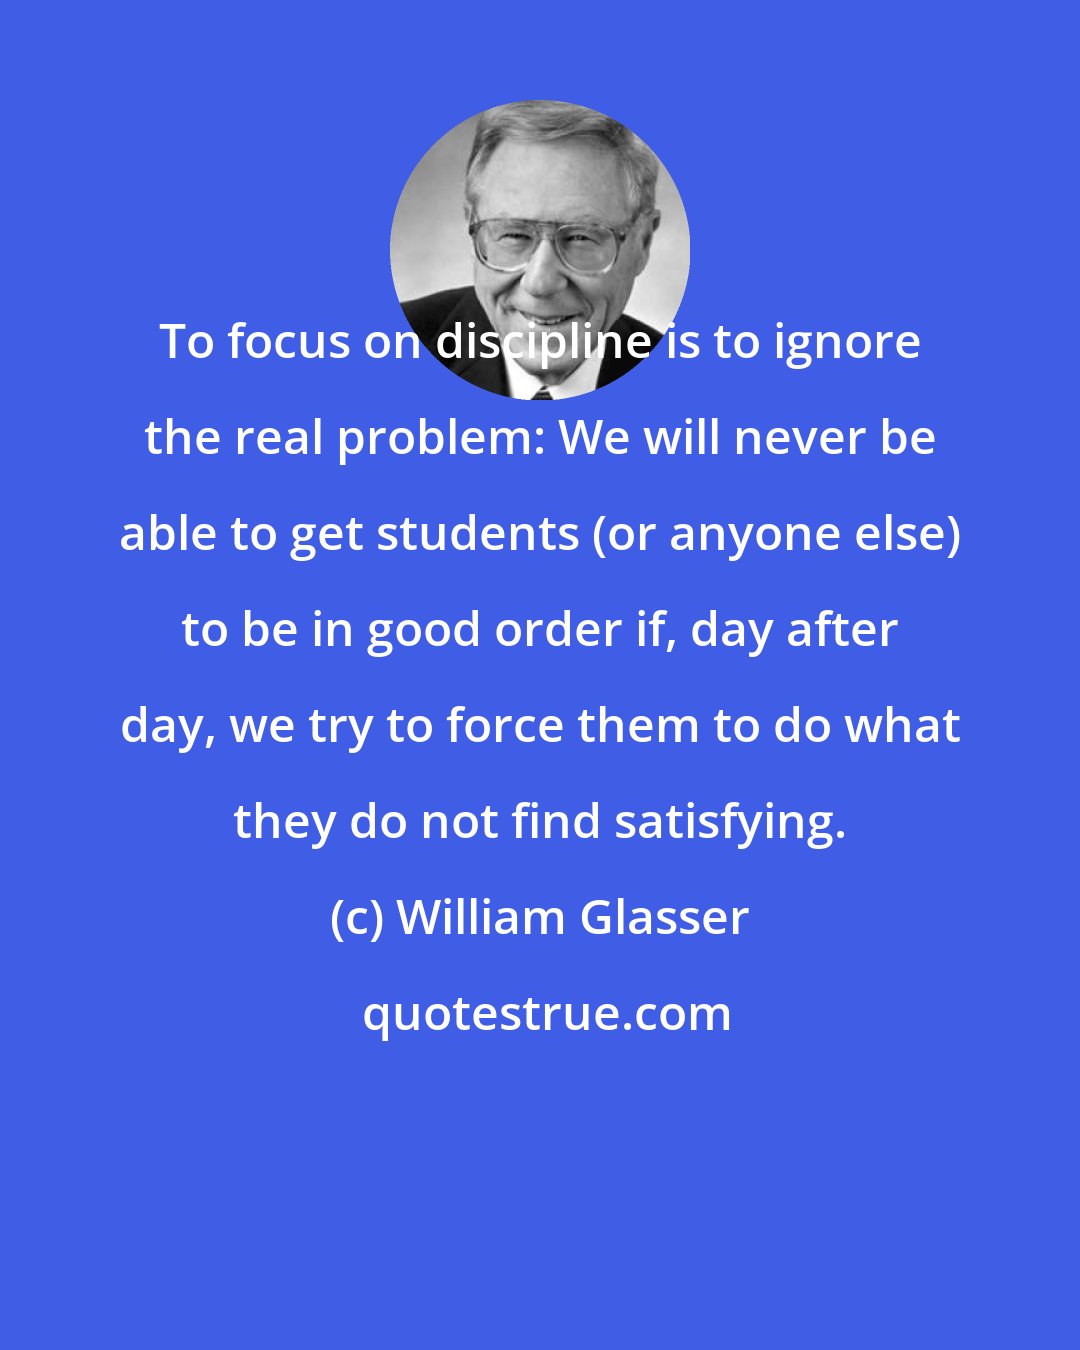 William Glasser: To focus on discipline is to ignore the real problem: We will never be able to get students (or anyone else) to be in good order if, day after day, we try to force them to do what they do not find satisfying.